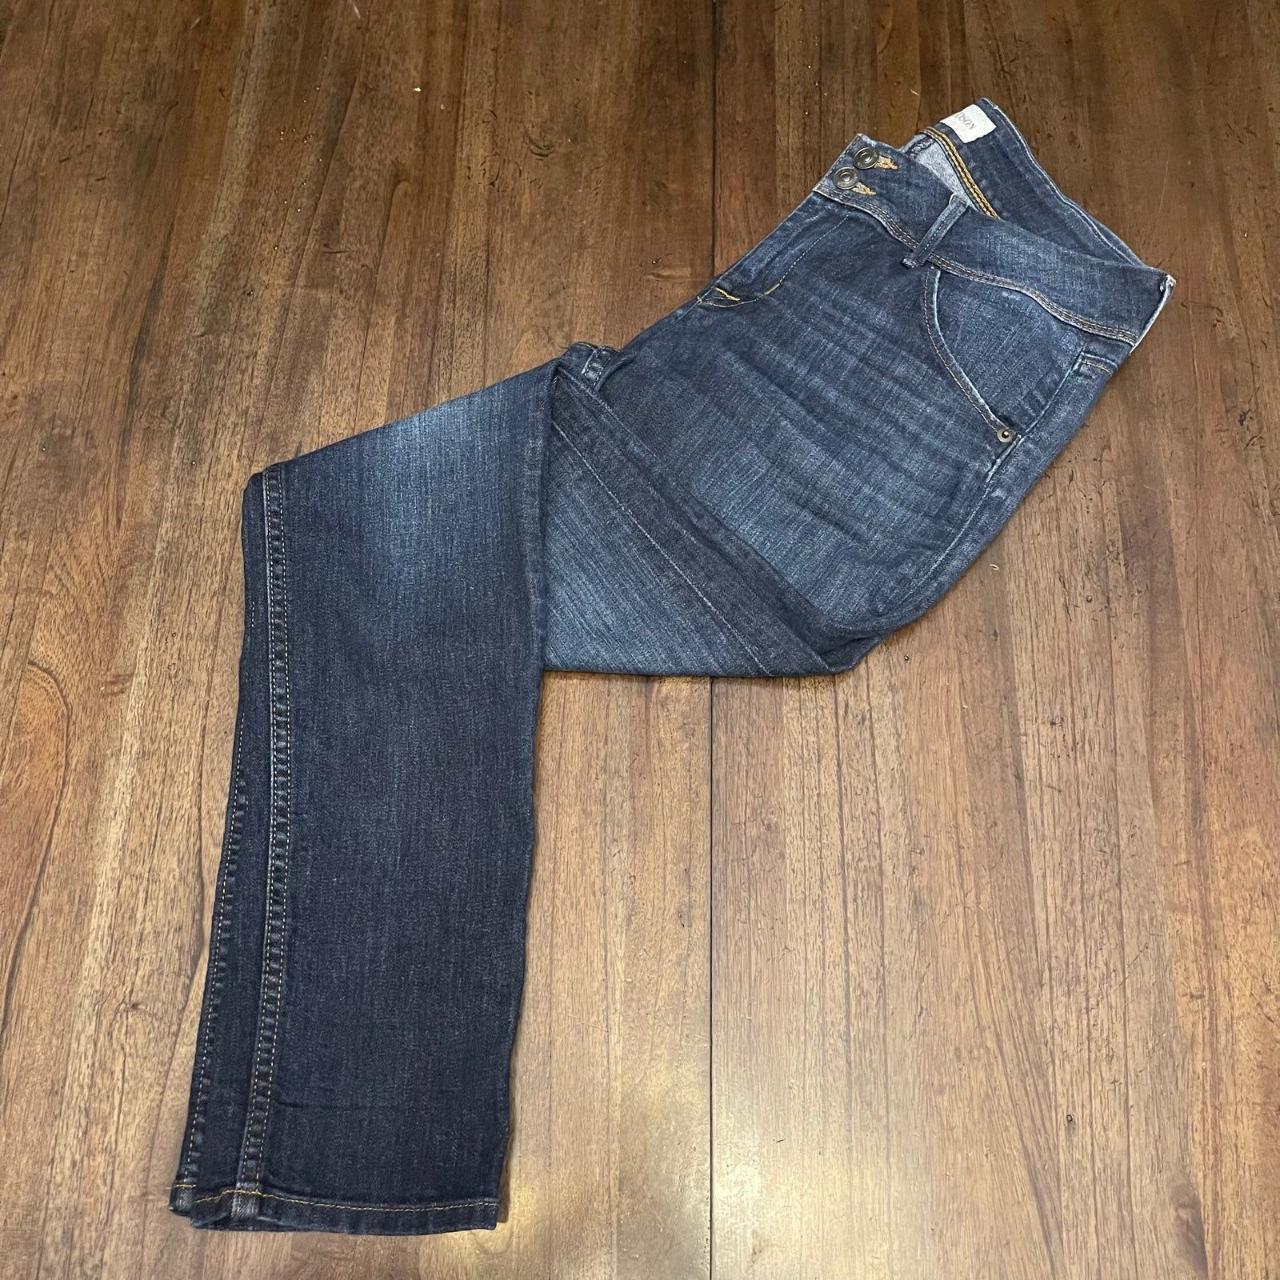 Product Image 2 - Hudson Collin Flap Skinny Jeans

Size